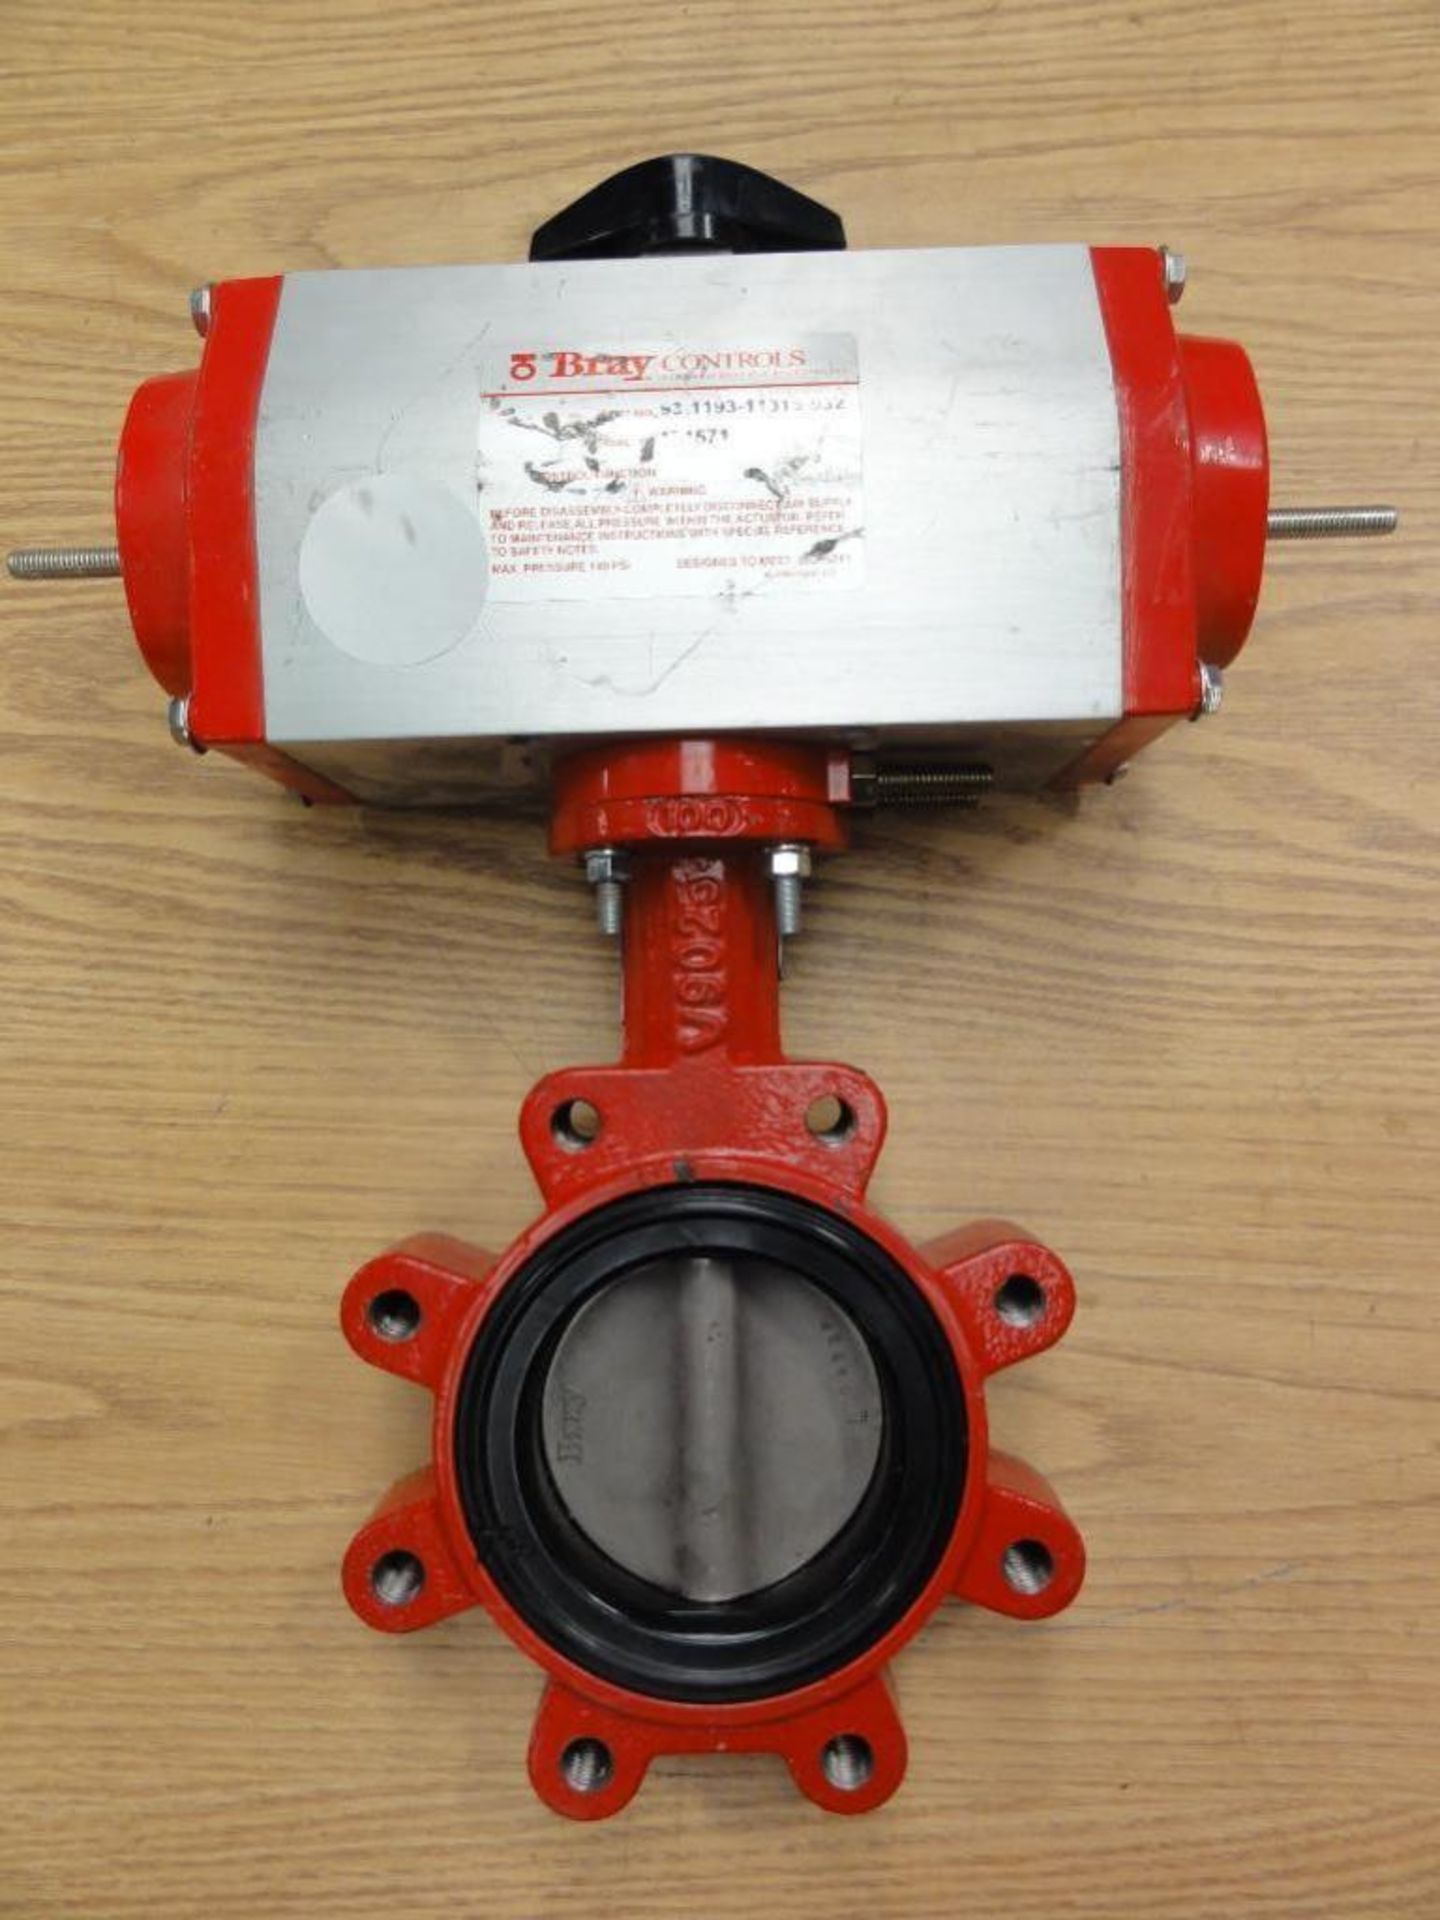 Bray 4" Butterfly Valve and Controller Model 93-1193-11315-532